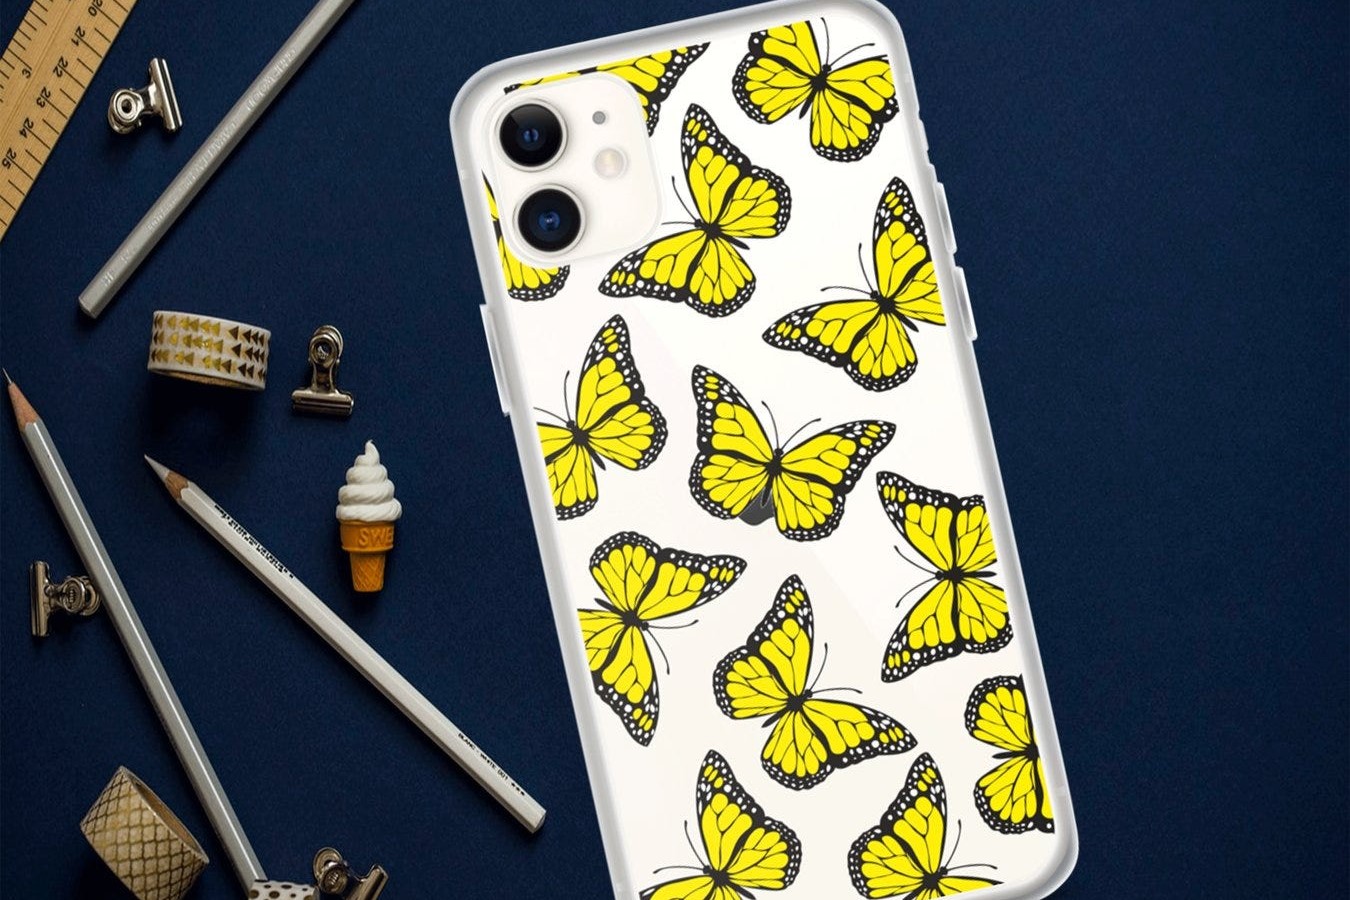 Selecting The Right Paint For Your Phone Case